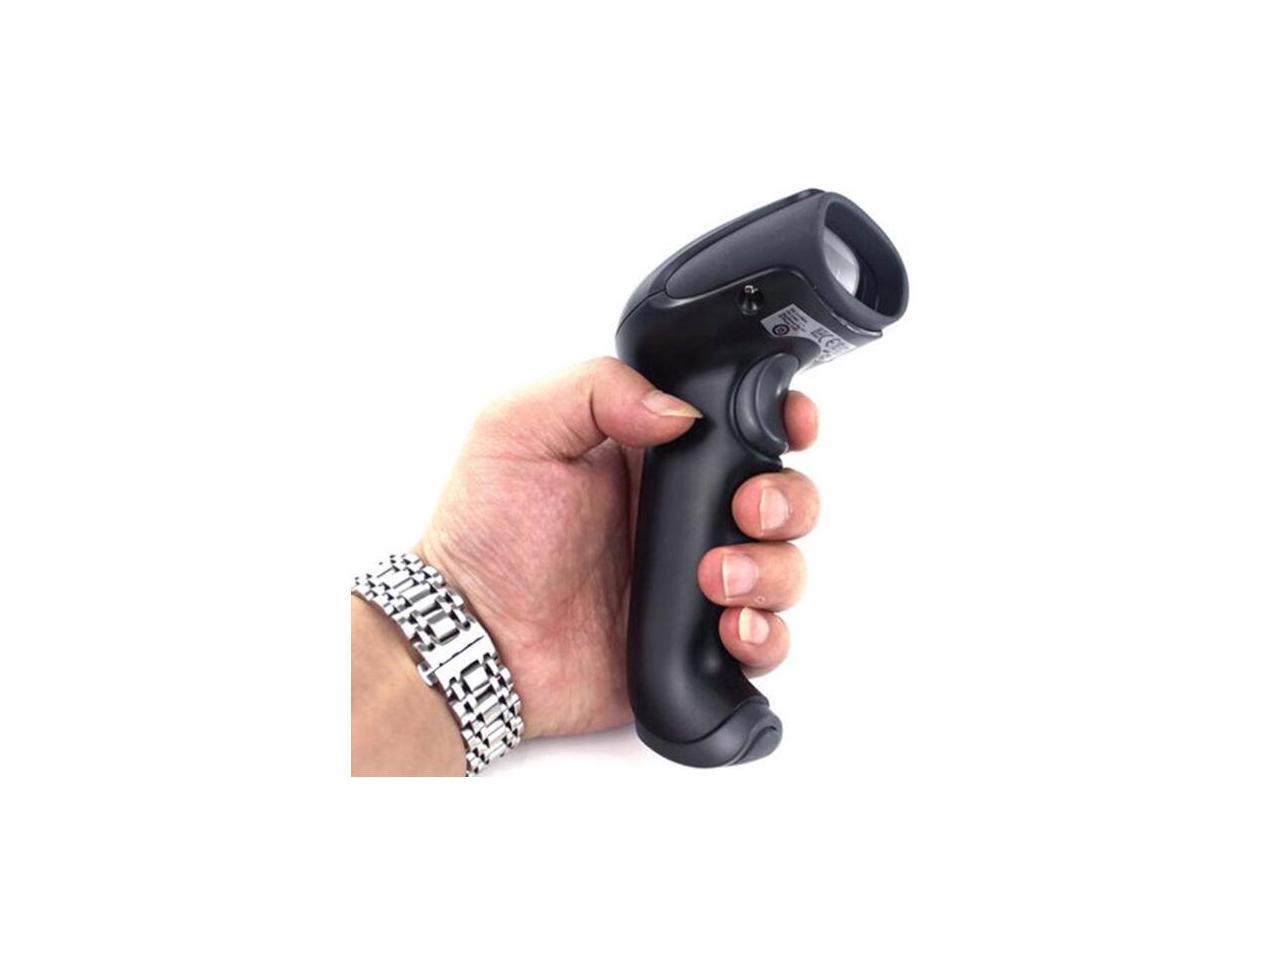 Honeywell Yj4600 2d Hand Held Bar Code Scanner With Usb Cable Black 4532